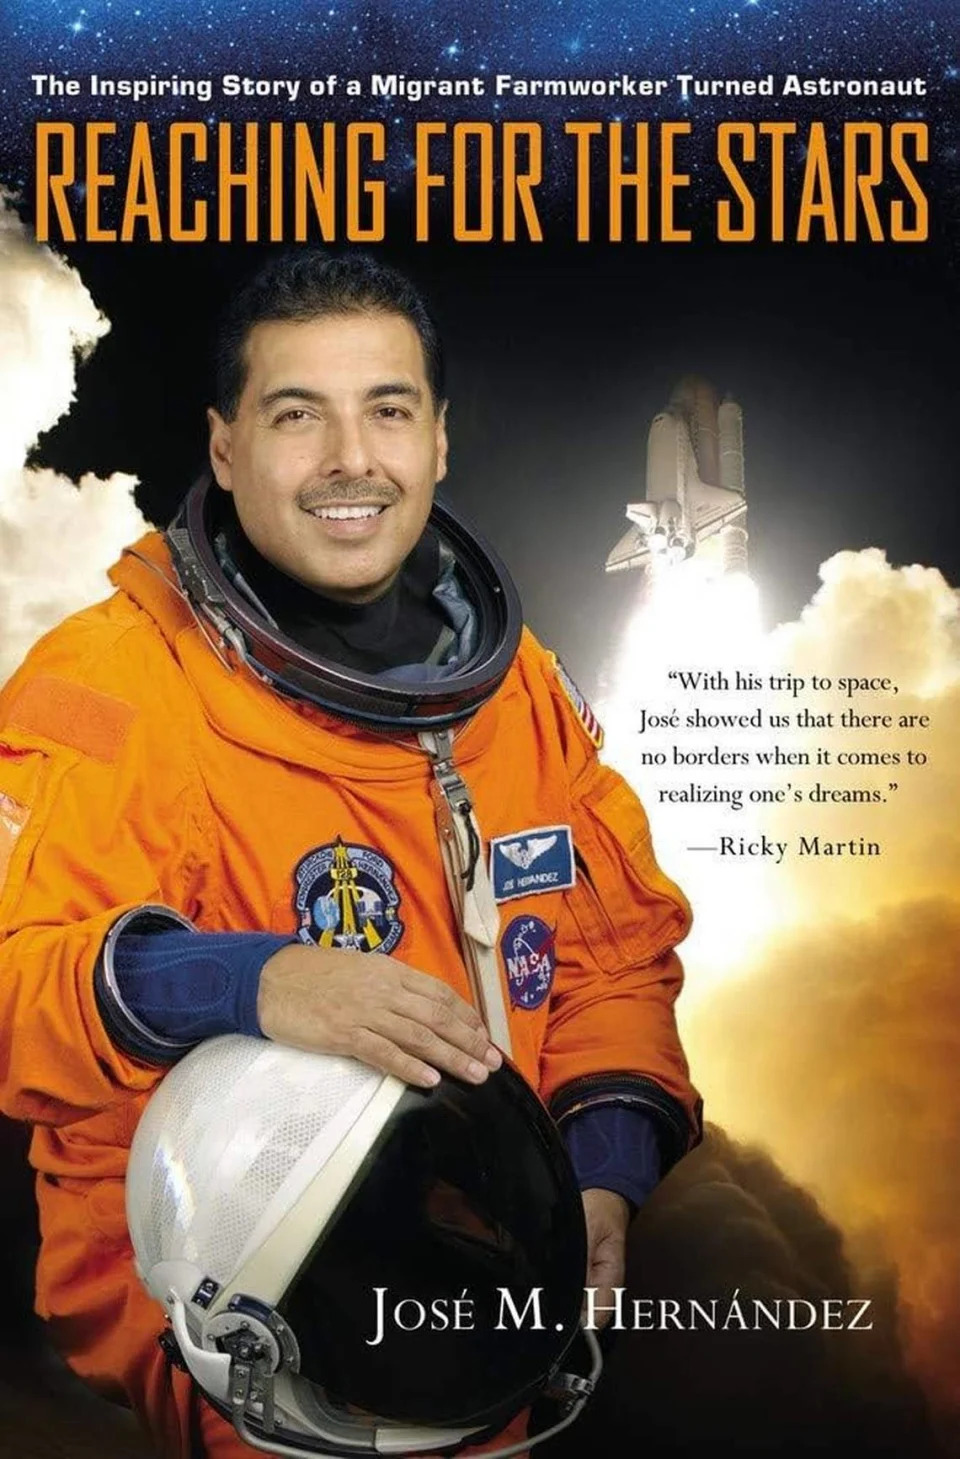 Cover of the book by José M. Hernández, the child migrant worker who became a NASA astronaut and inspired the newly released Amazon Prime movie “A Million Miles Away.” Courtesy